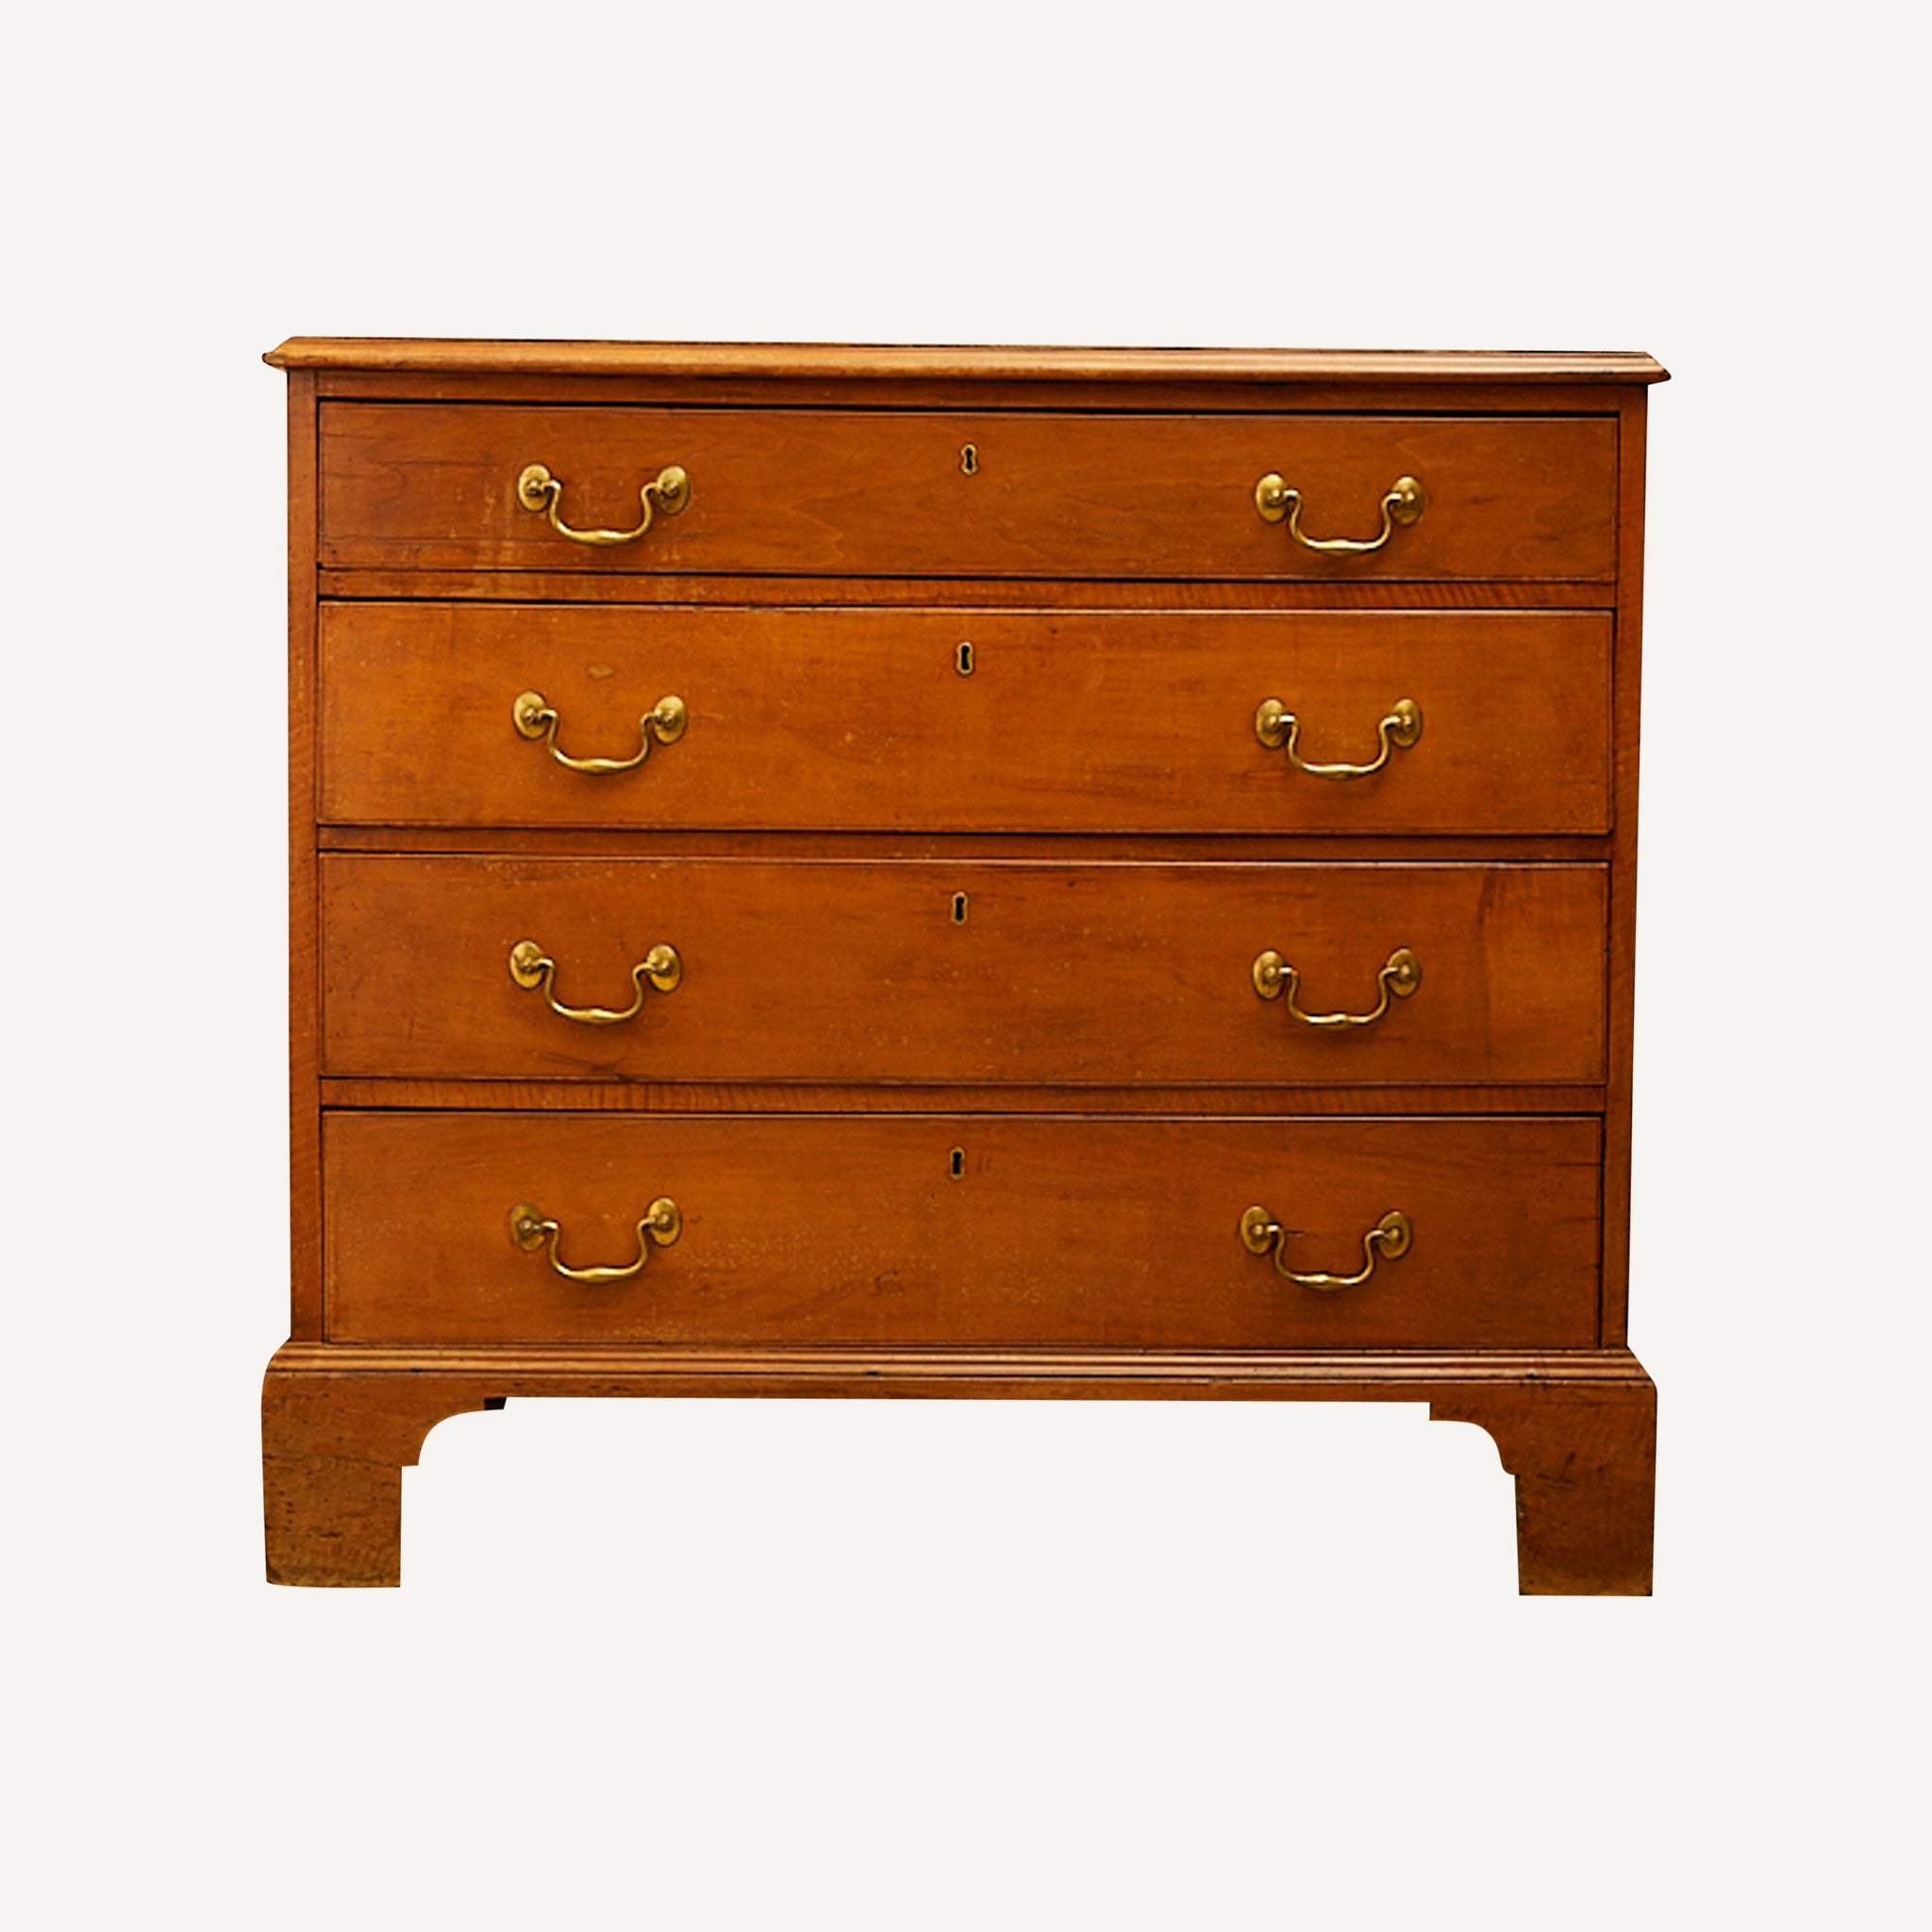 ANTIQUE GEORGIAN CHEST OF DRAWERS